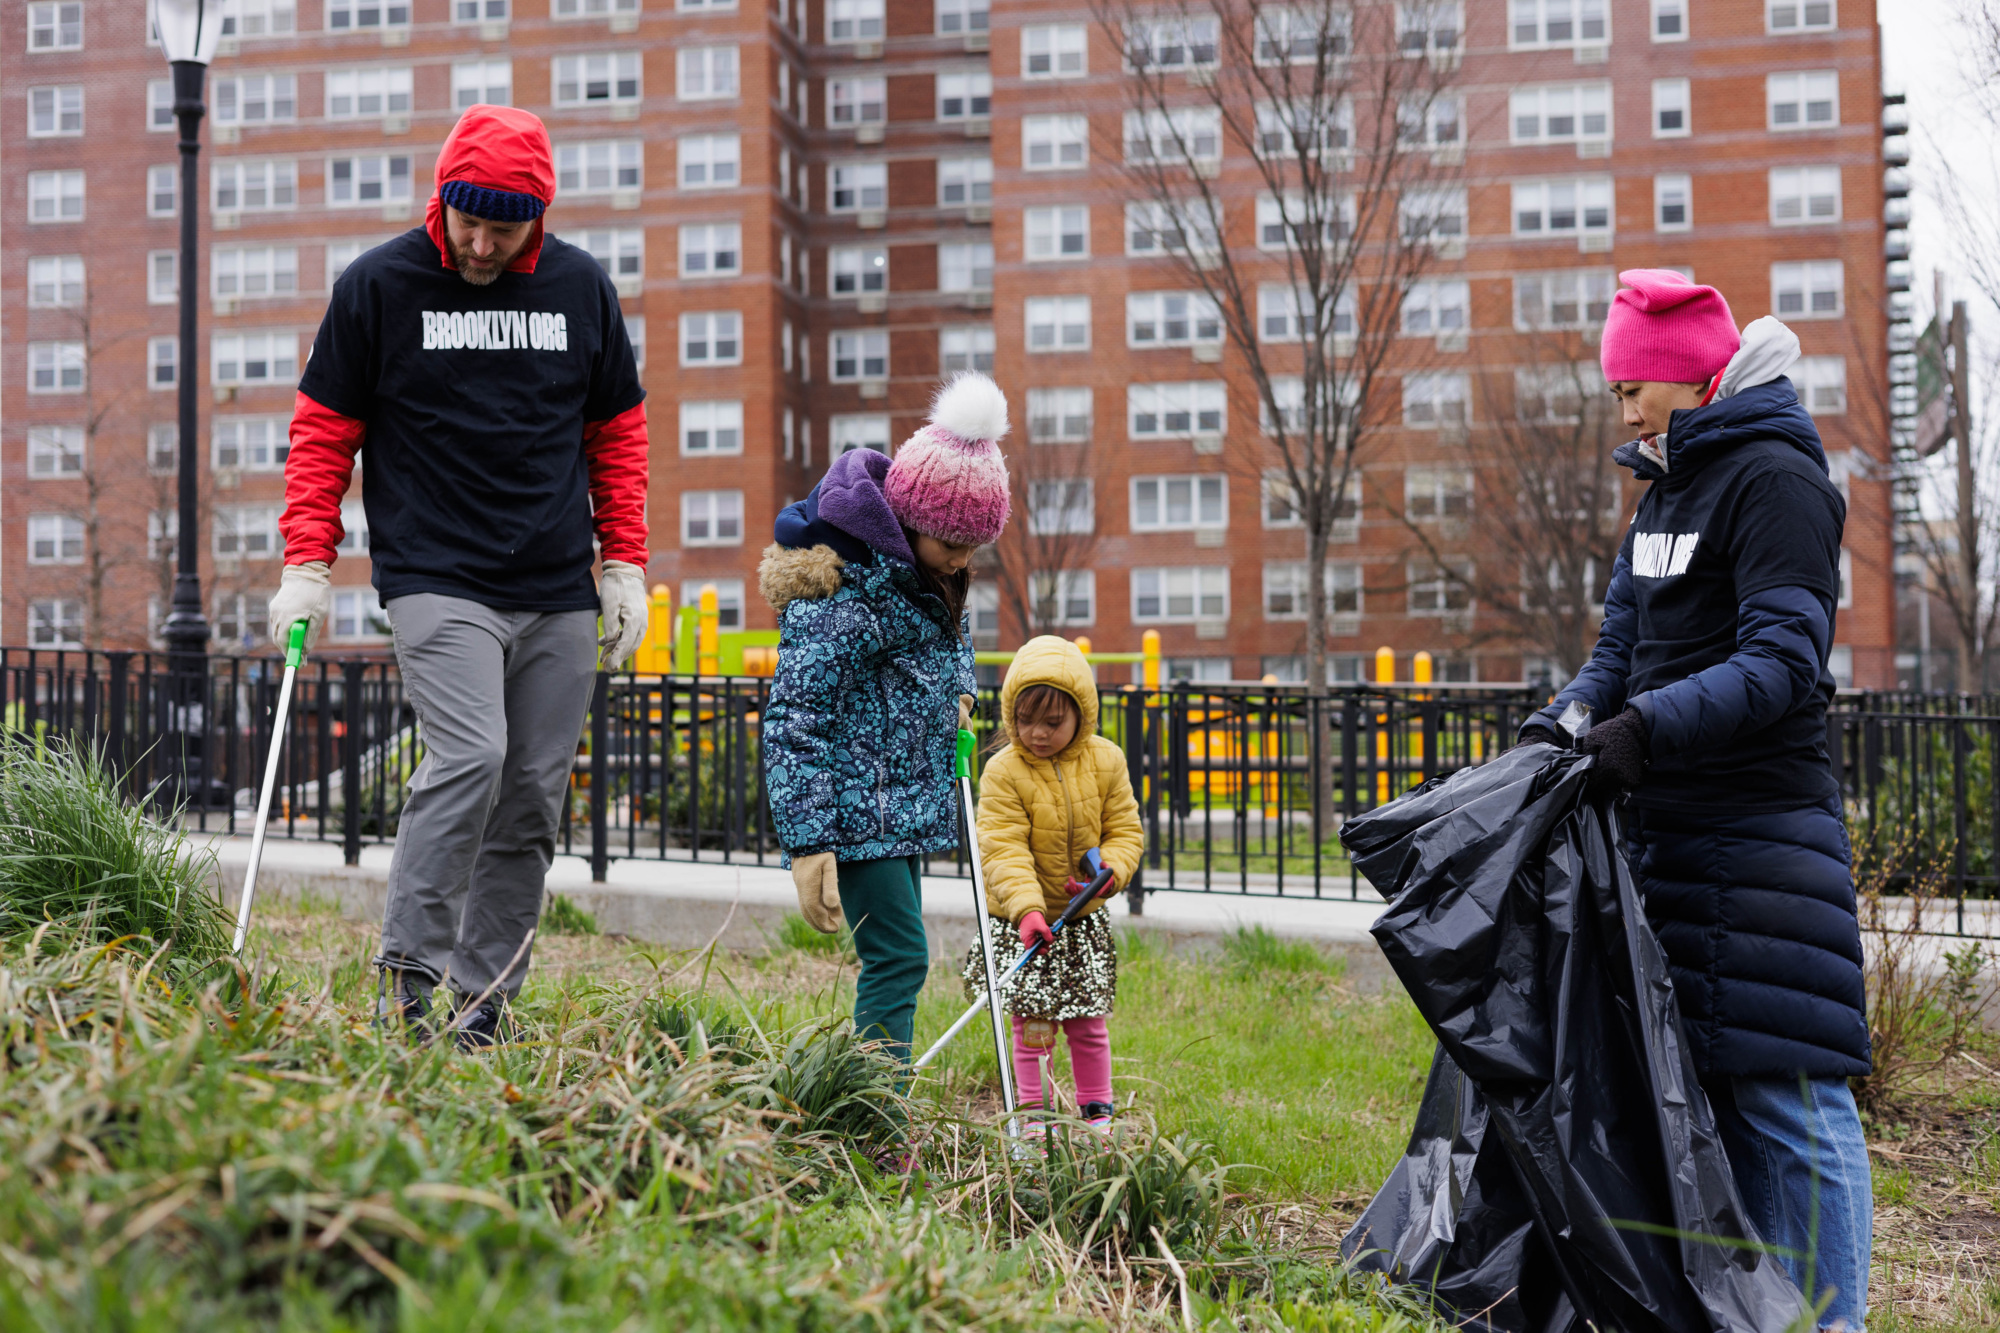 Family volunteers cleaning a park during winter, wearing jackets and hats, with city buildings in the background.